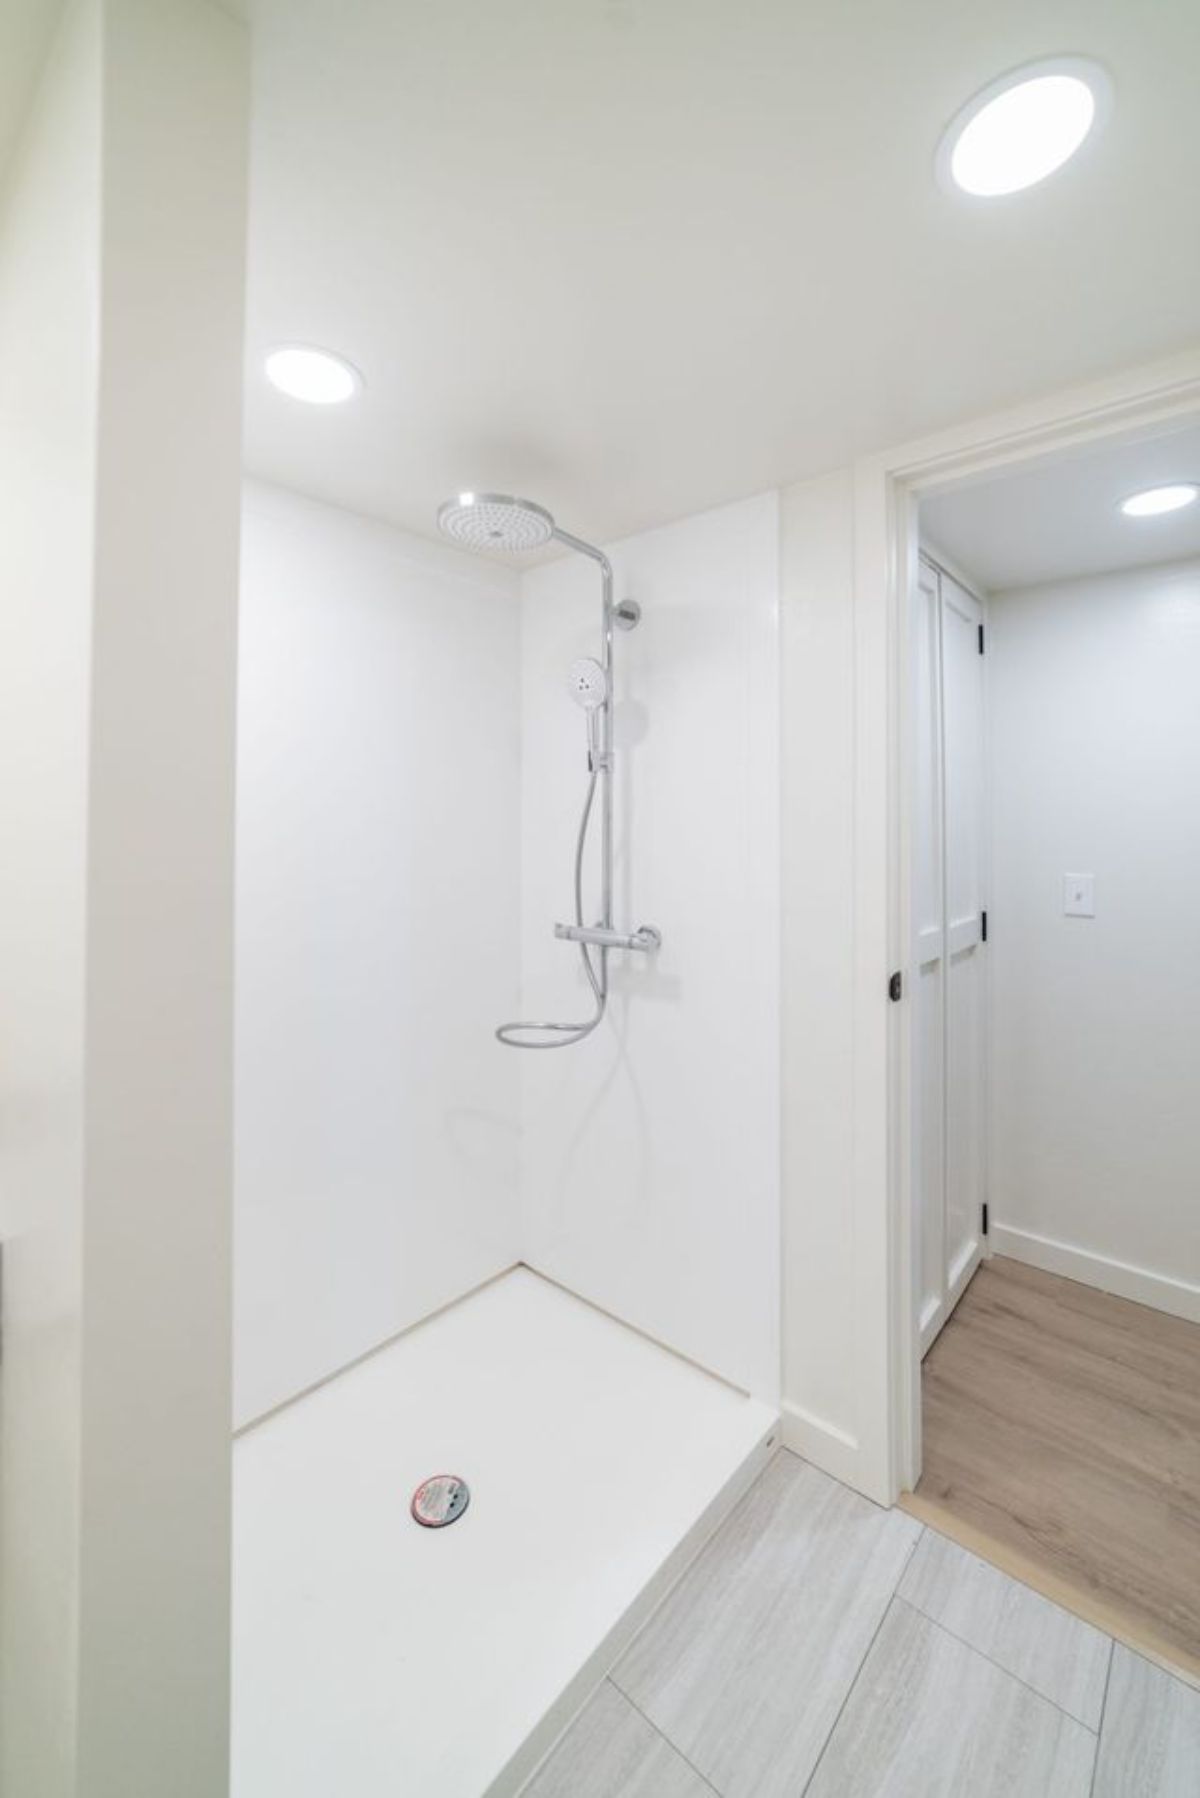 Separate shower area of Stunning Two Bedroom Tiny House